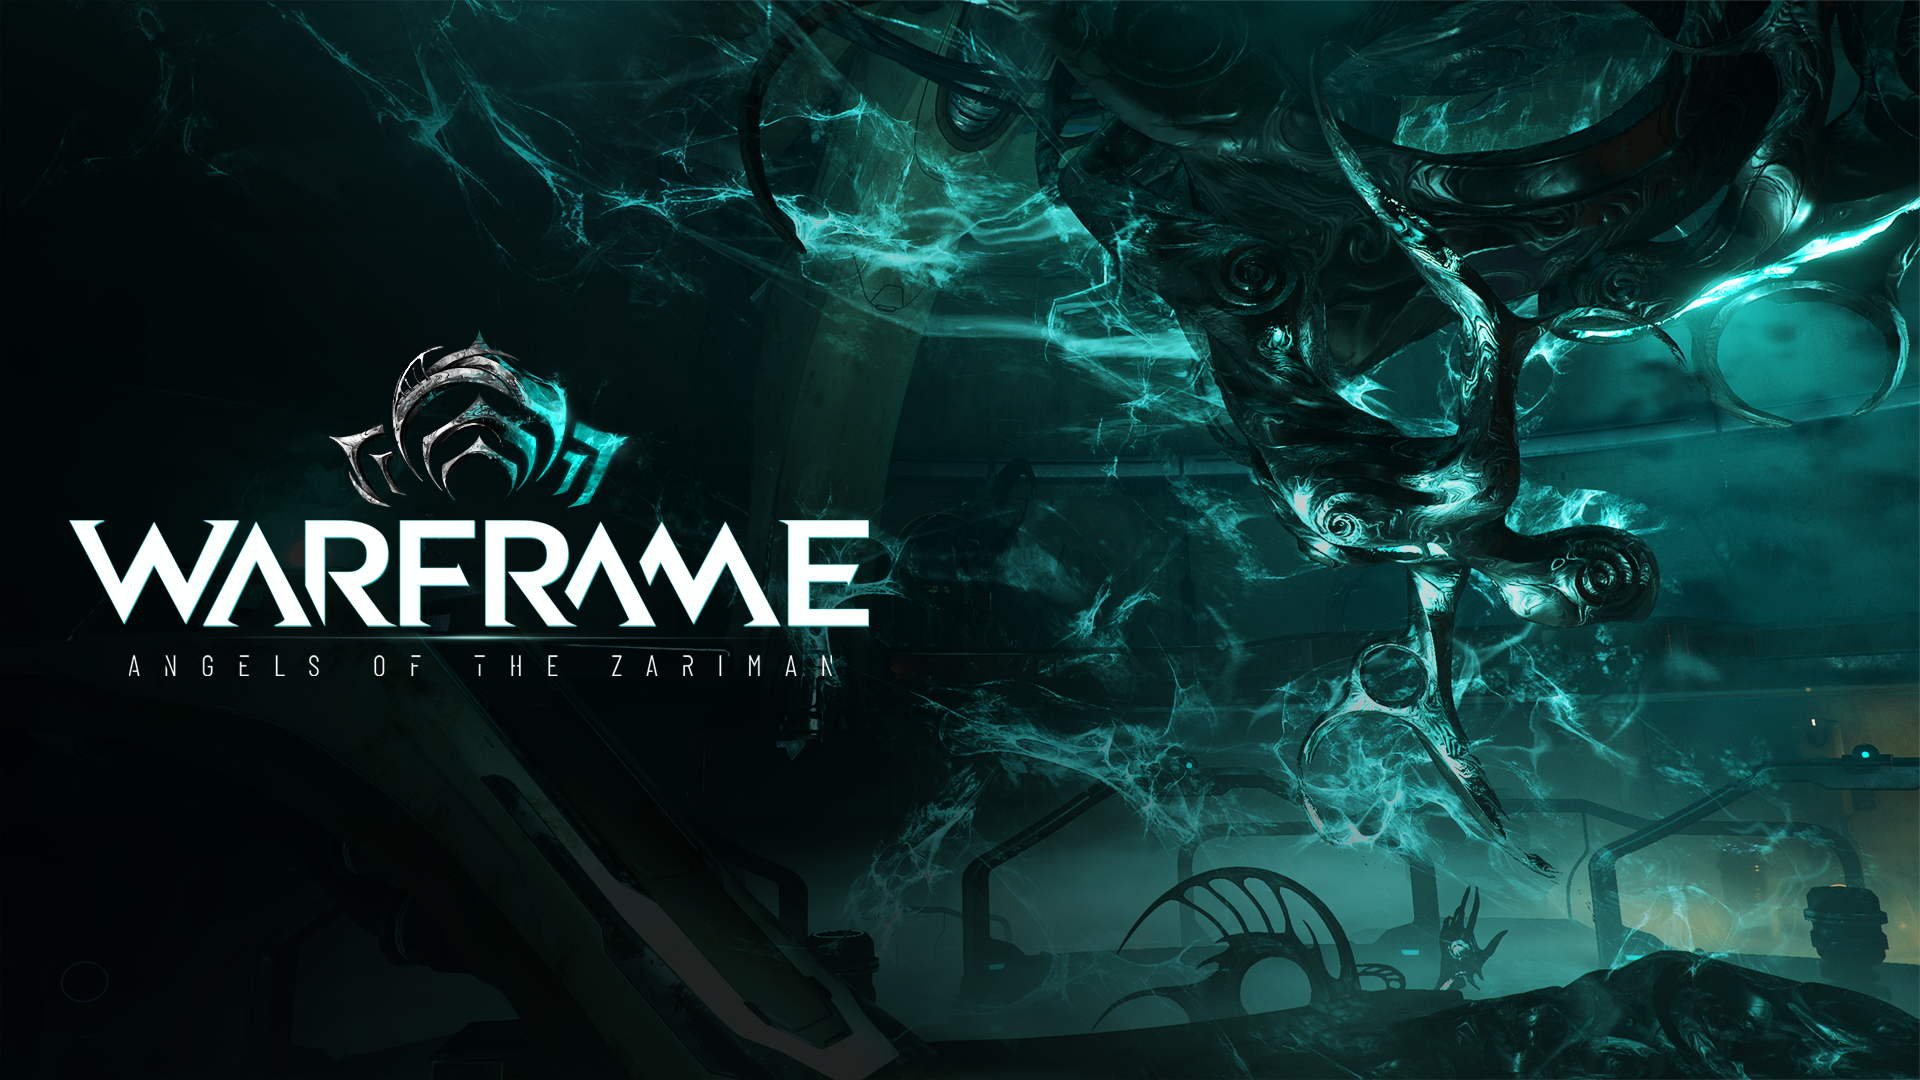 Image for Warframe is getting a new quest, frame, missions and more with Angels of the Zariman in April